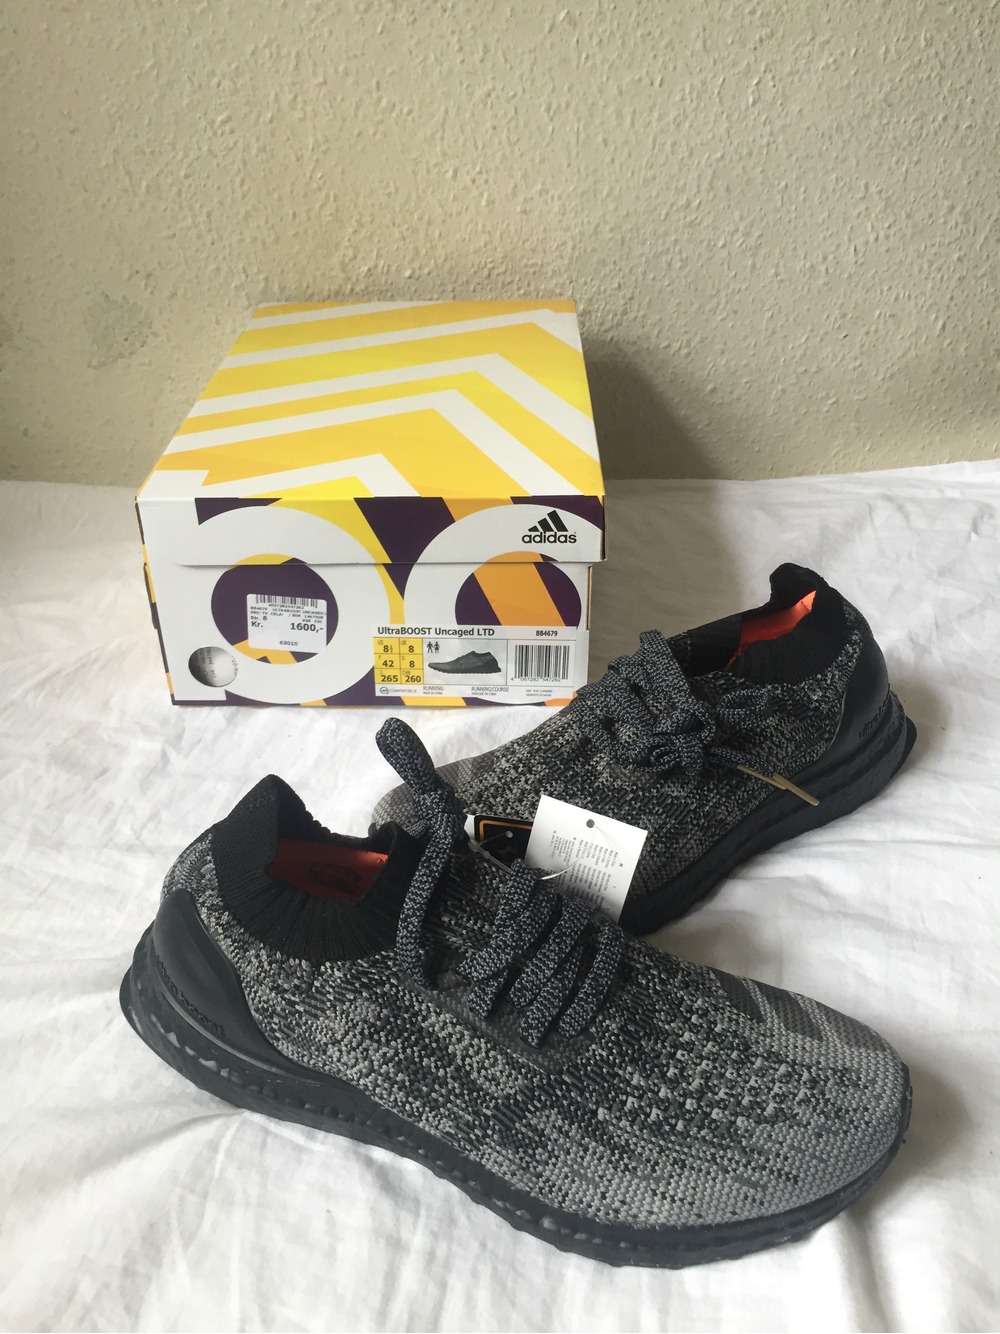 Adidas nmd r1 shoe palace black and gold eh2749